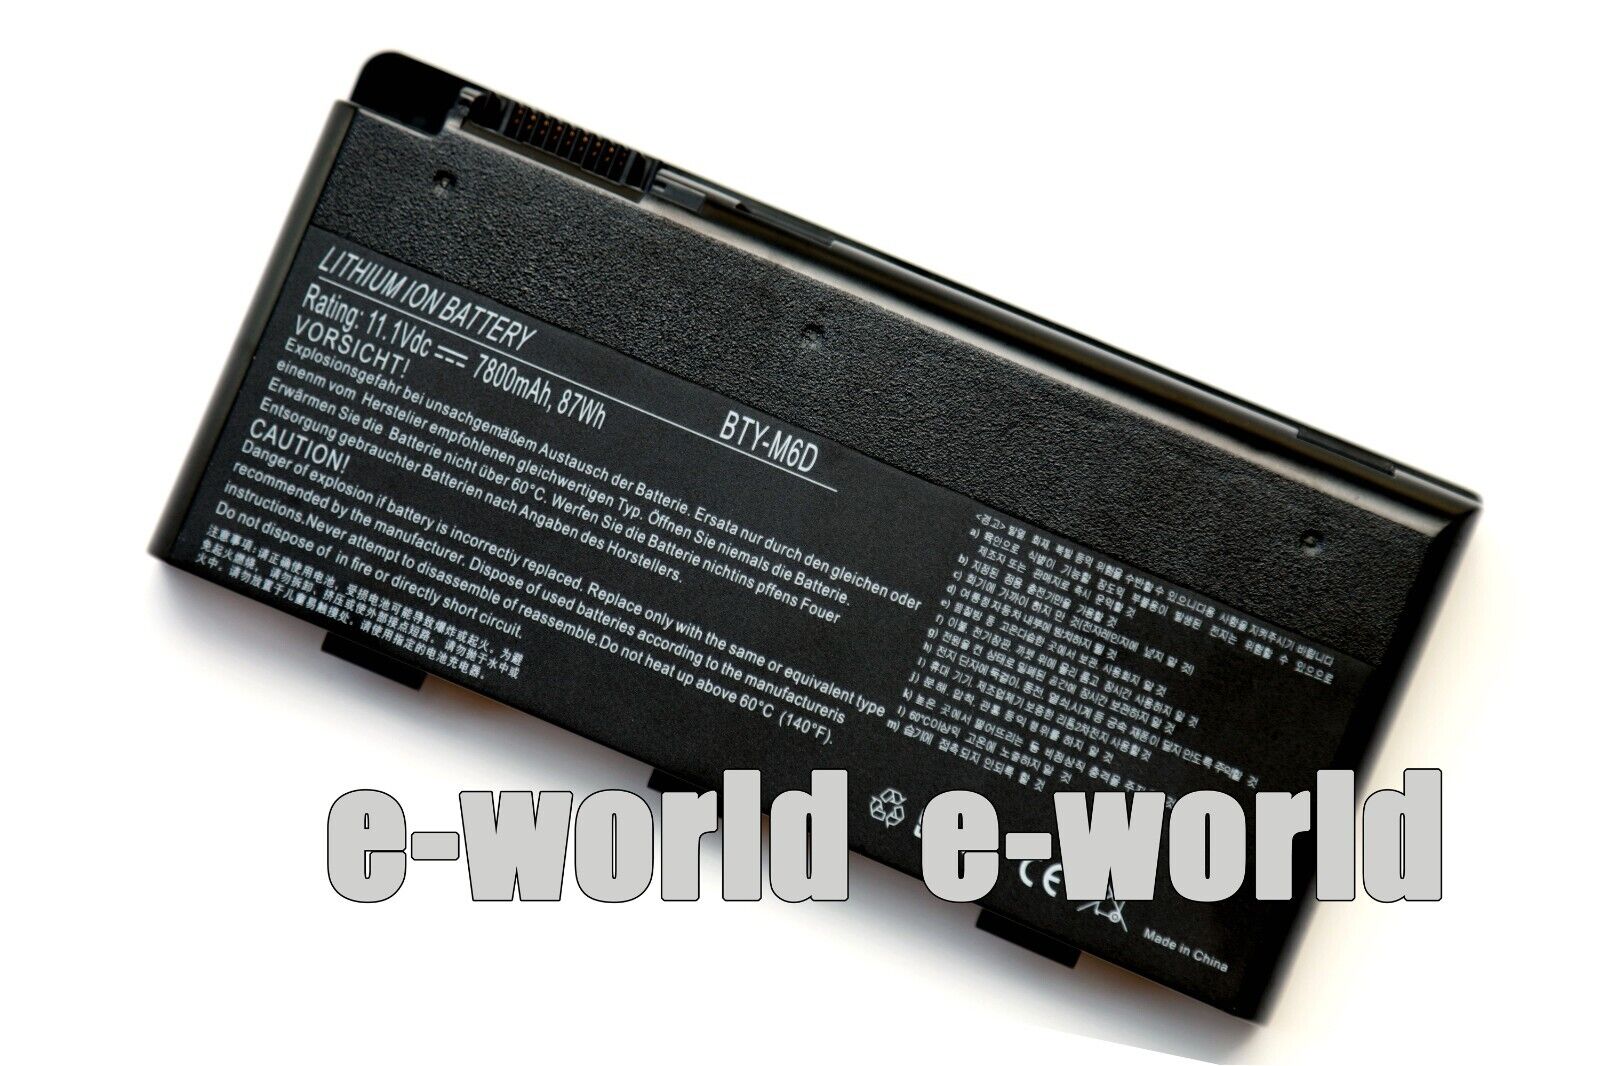 NEW Genuine BTY-M6D Battery for MSI GT70 GT780 GT60 GT680R GT683R GT685R G51